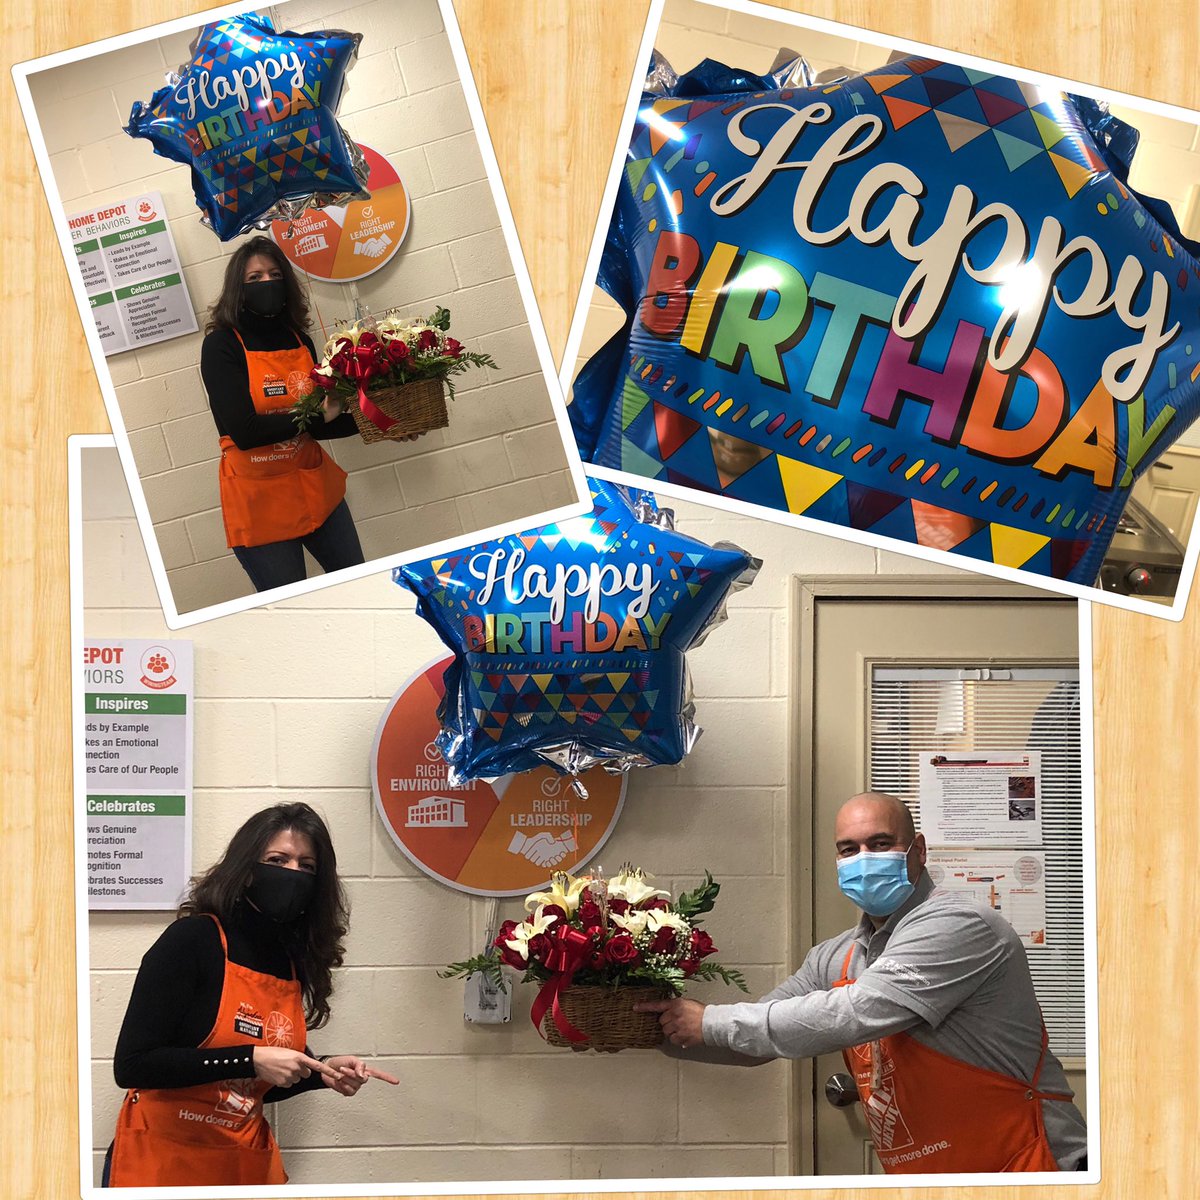 And now it our Ops ASM’sturn...Happy Birthday Alejandra. Freight Team DH Keith giving Alejandra Flowers and the all important Balloon. 🎉🎉🎉 @fearon_frank @ValineAlejandra @XoXoNicole420 @fernandoa1263 @PintoLpinto83 @KaitlynKrulan @LourdesPerry